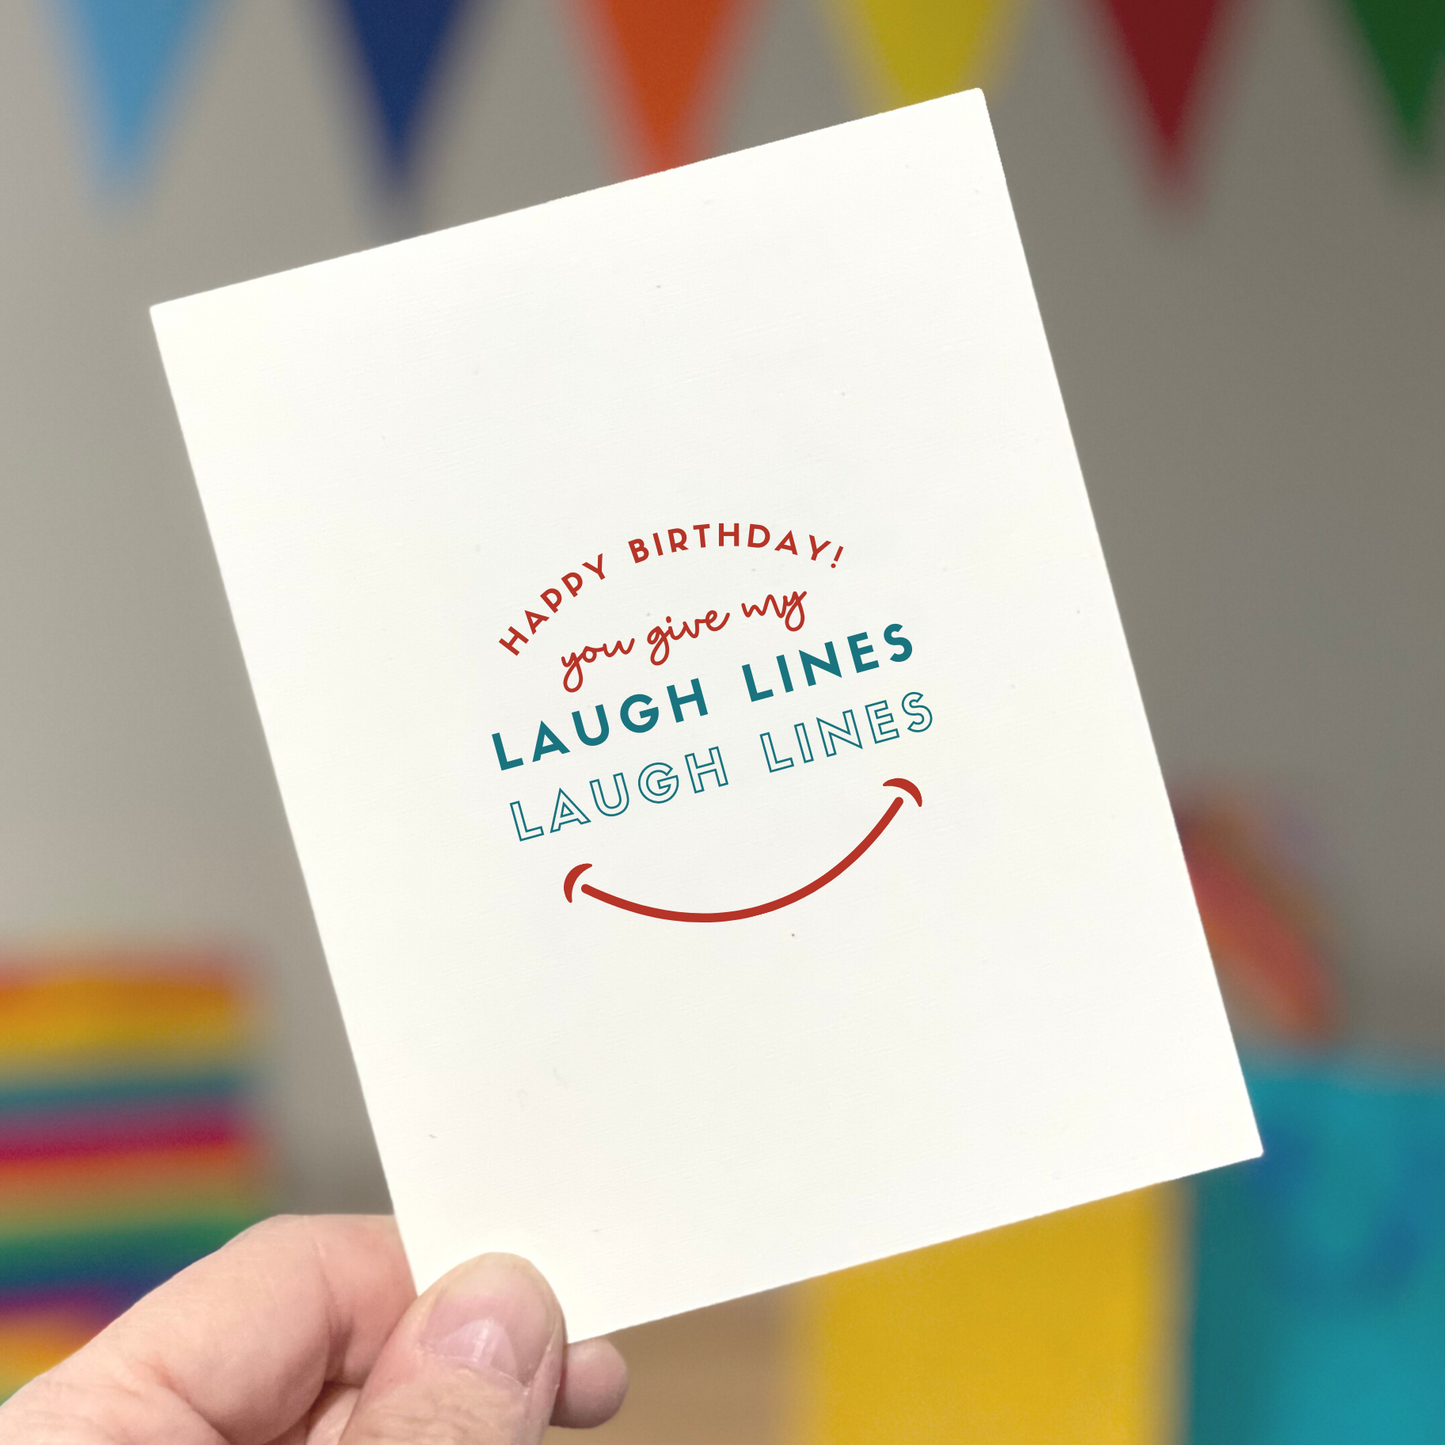 You Give My Laugh Lines, Laugh Lines, Age-Positive Birthday Card